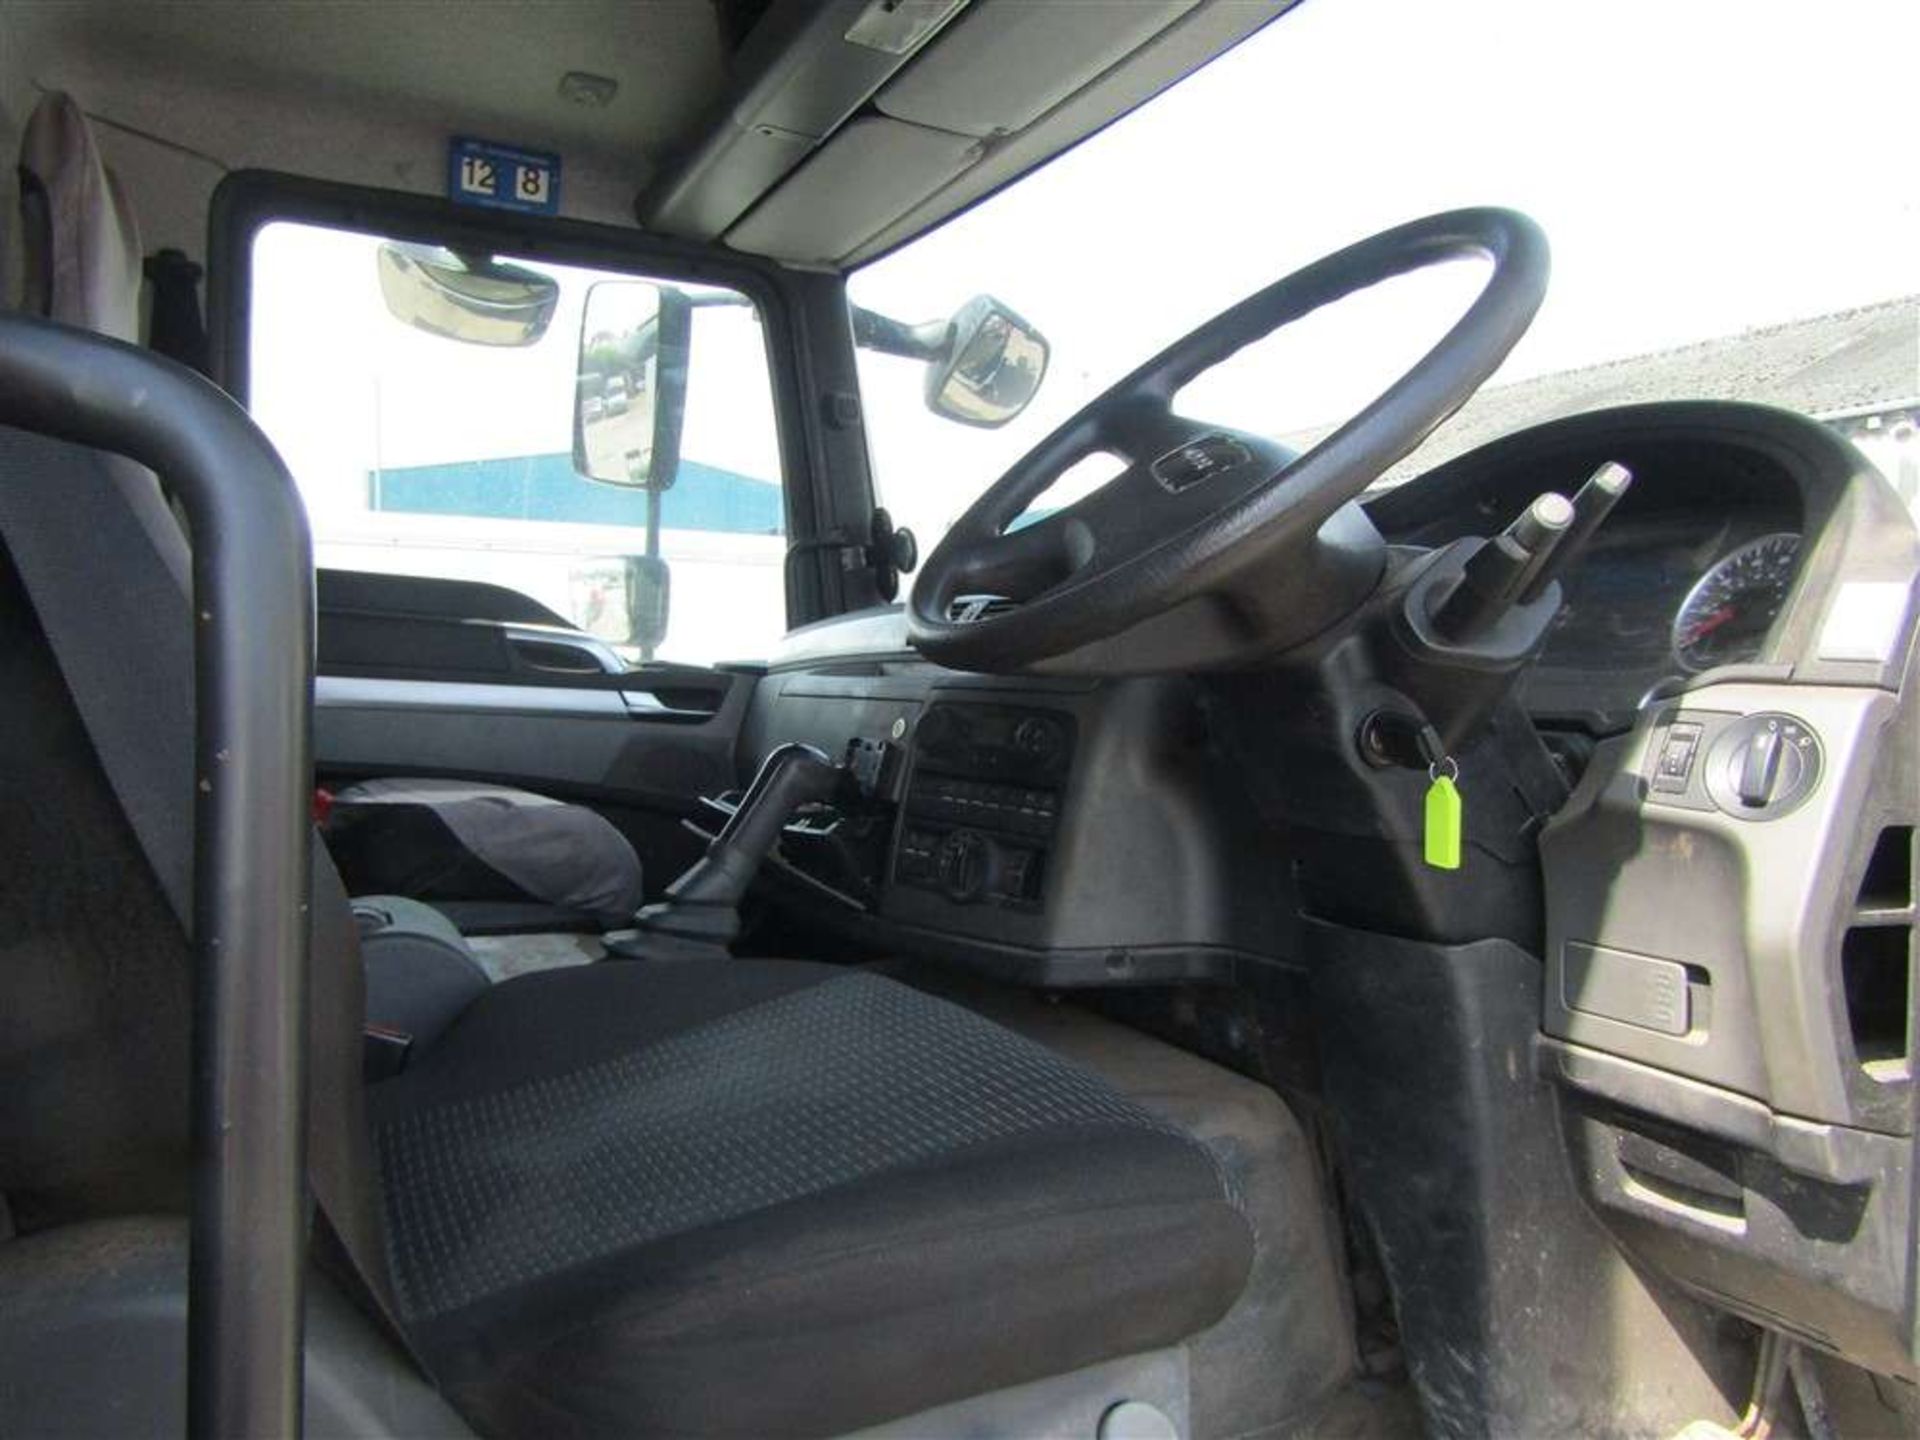 2014 64 reg MAN TGM 13.250 4x4 Chassis Cab (Direct Council) - Image 5 of 6